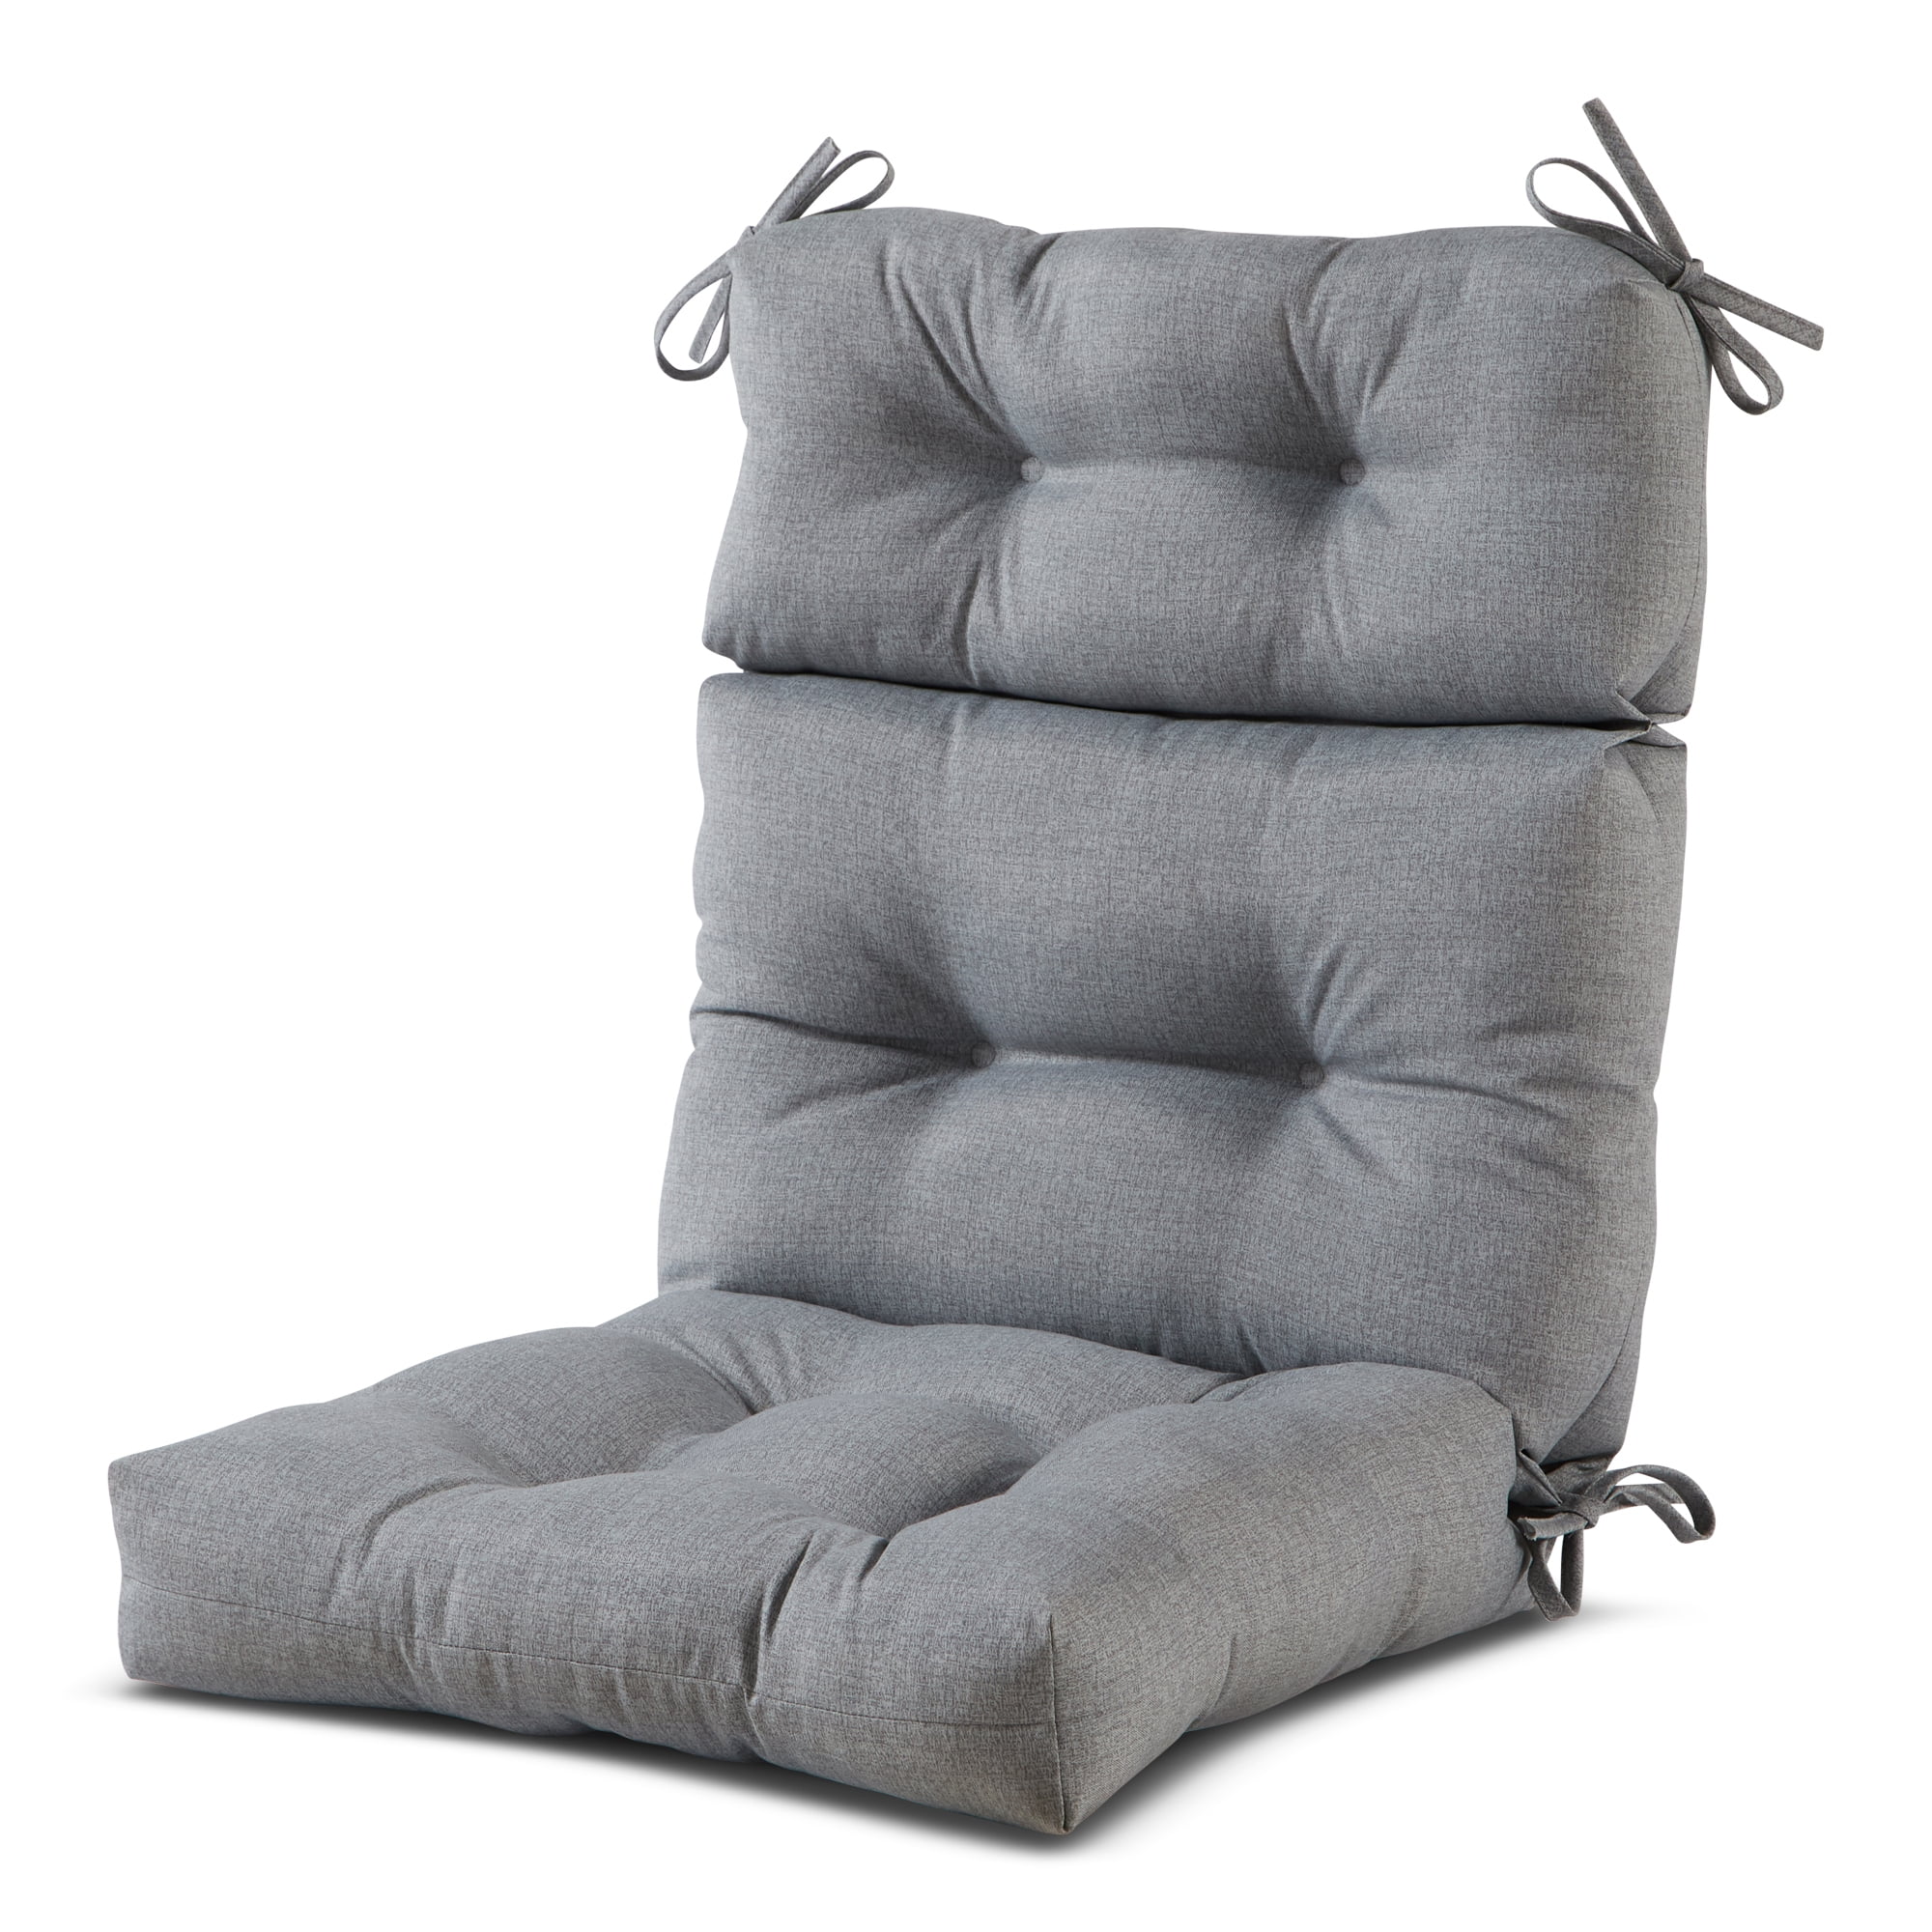 Solid Heather Gray 44 x 22 in. Outdoor High Back Chair Cushion